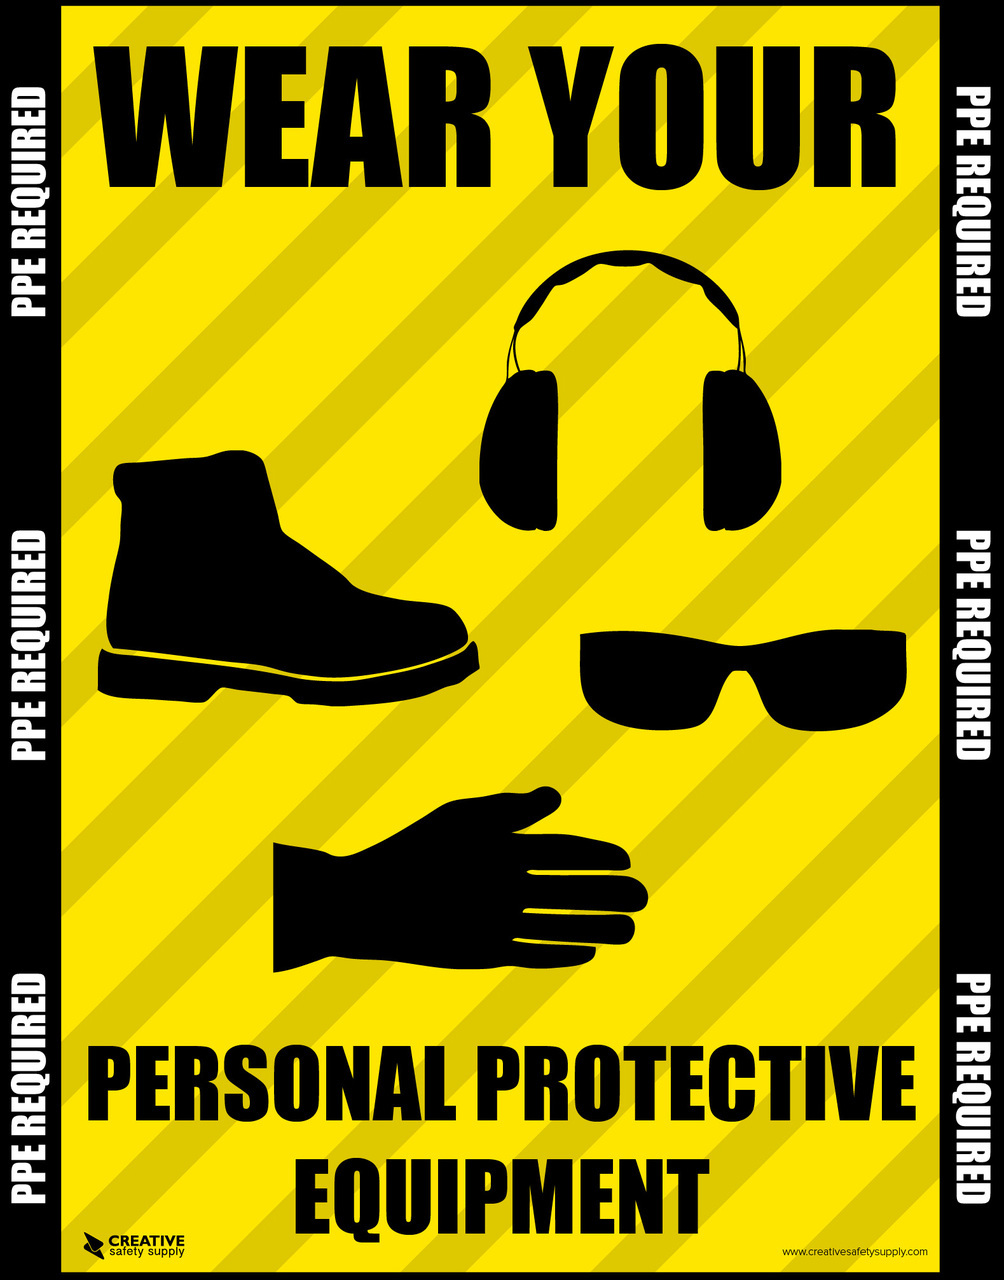 Wear your personal.